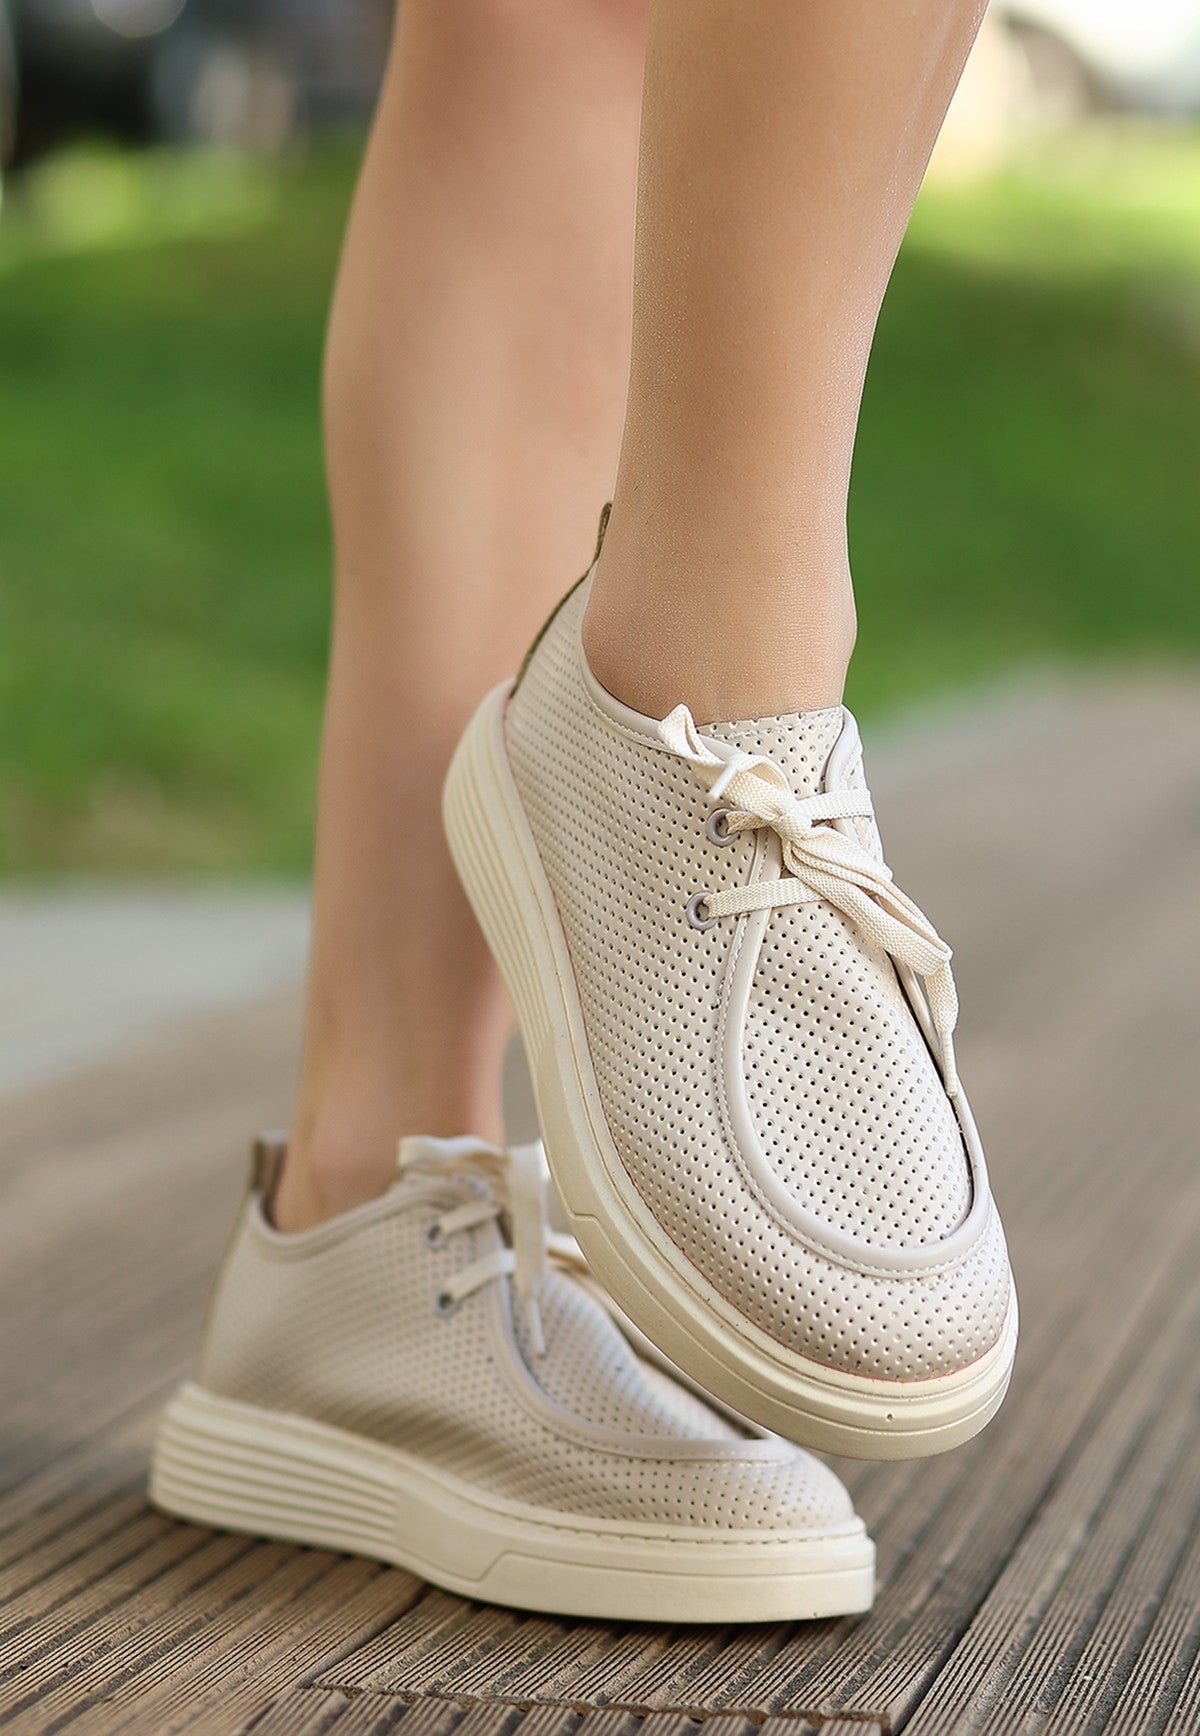 Women's Olse Beige Leather Laced Sports Shoes